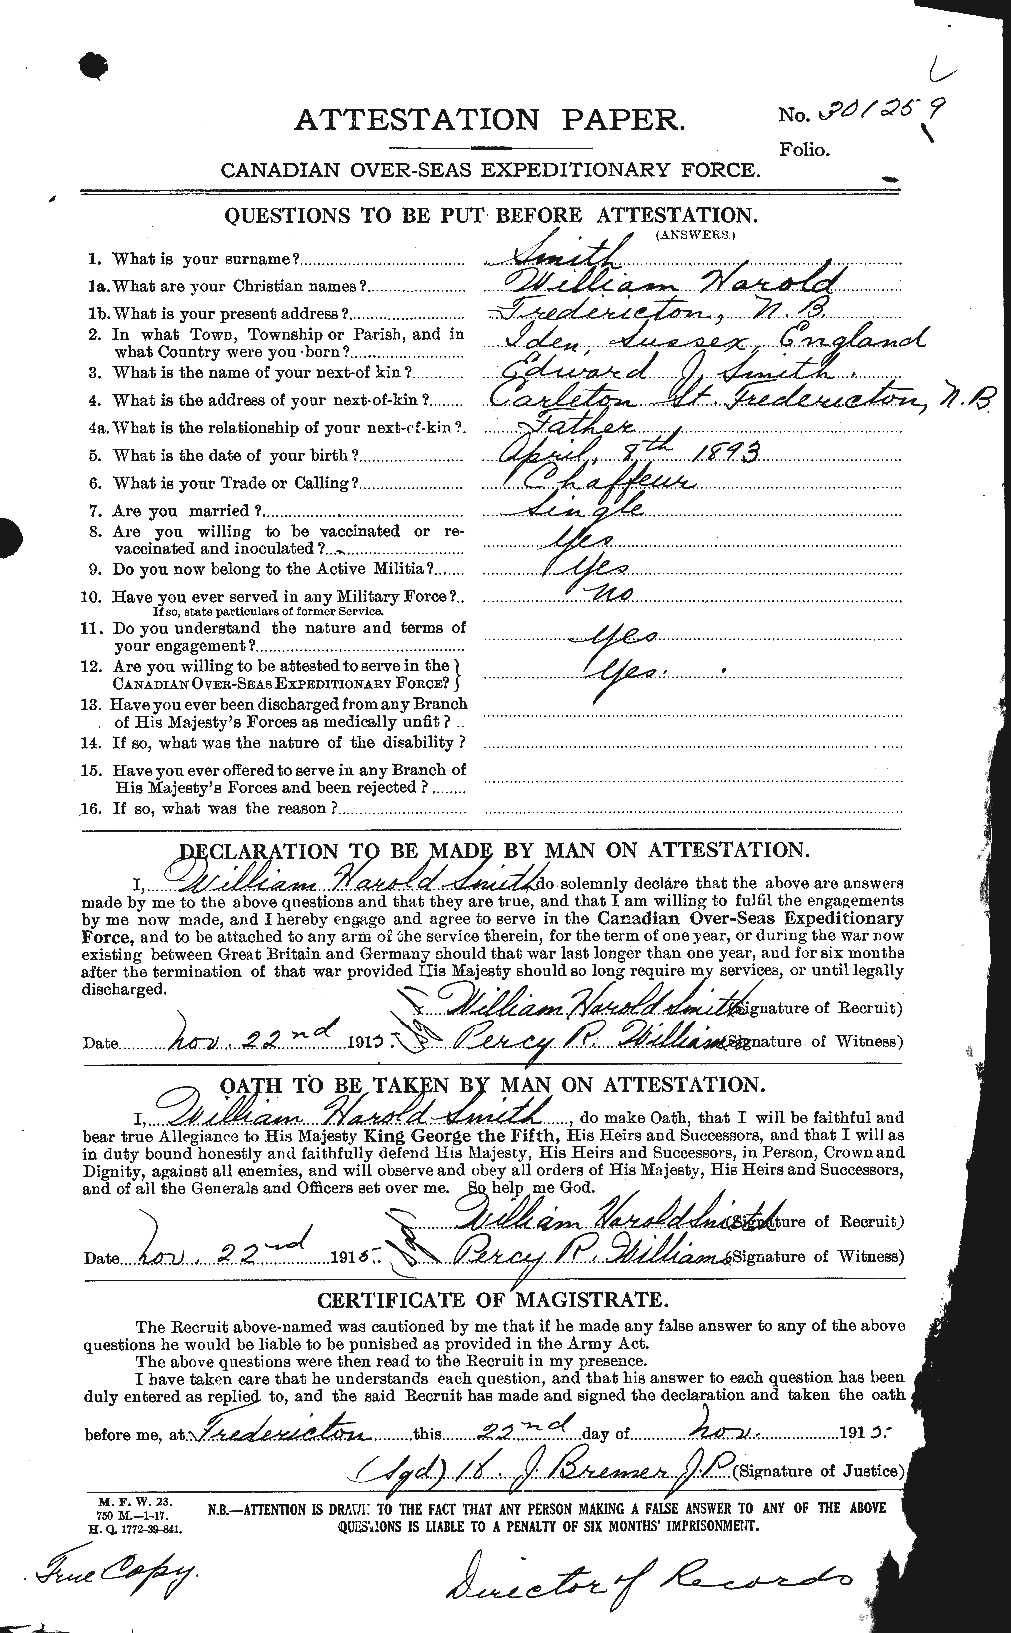 Personnel Records of the First World War - CEF 109624a